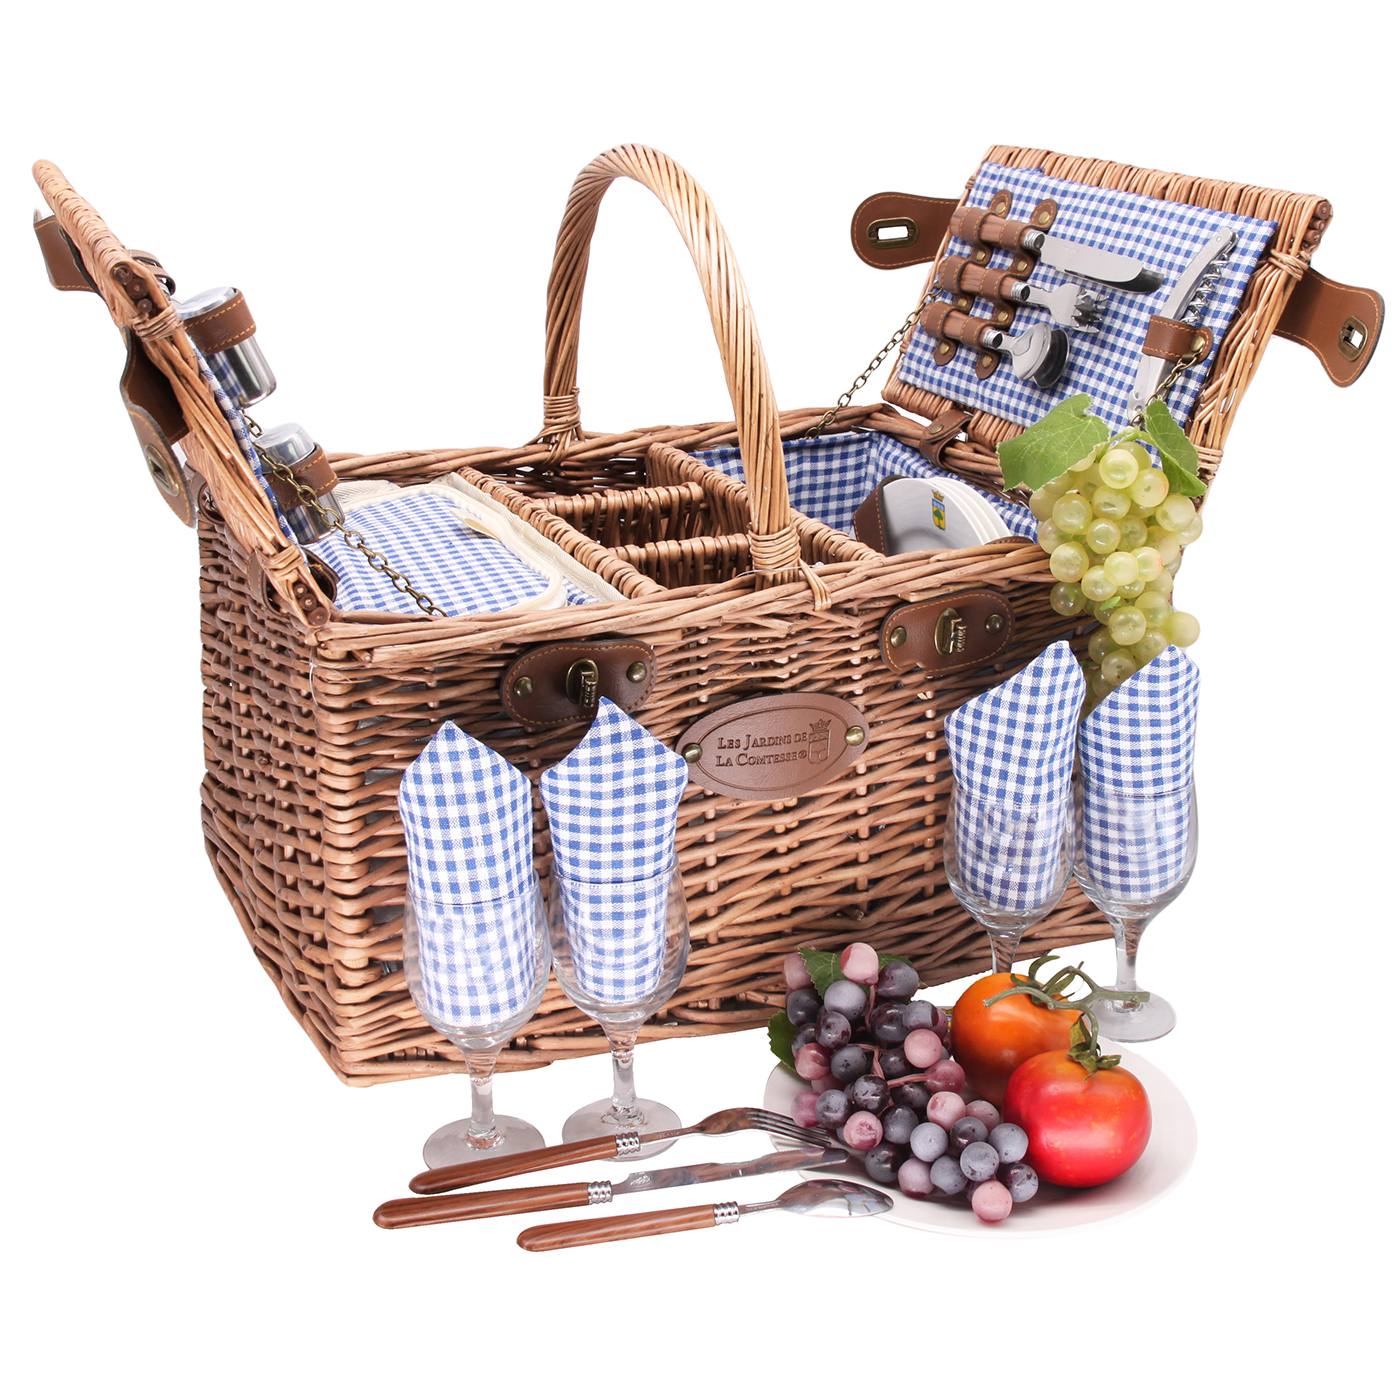 Mikash 2/4 Person Wicker Picnic Basket Hamper Set with Flatware and Wine Glasses Model PCNCST 698 